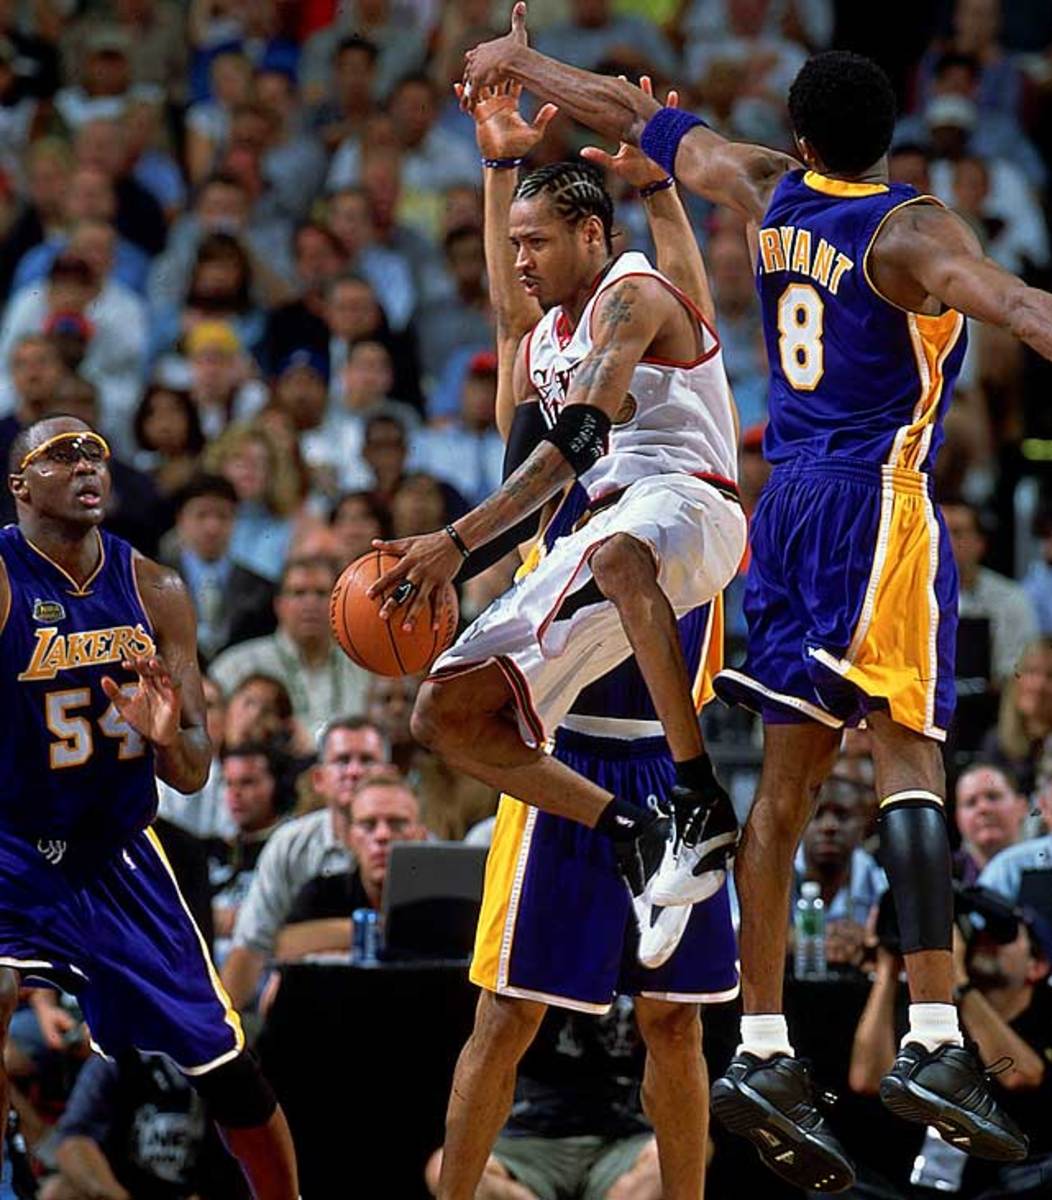 A look back at Allen Iverson's Hall of Fame career with the